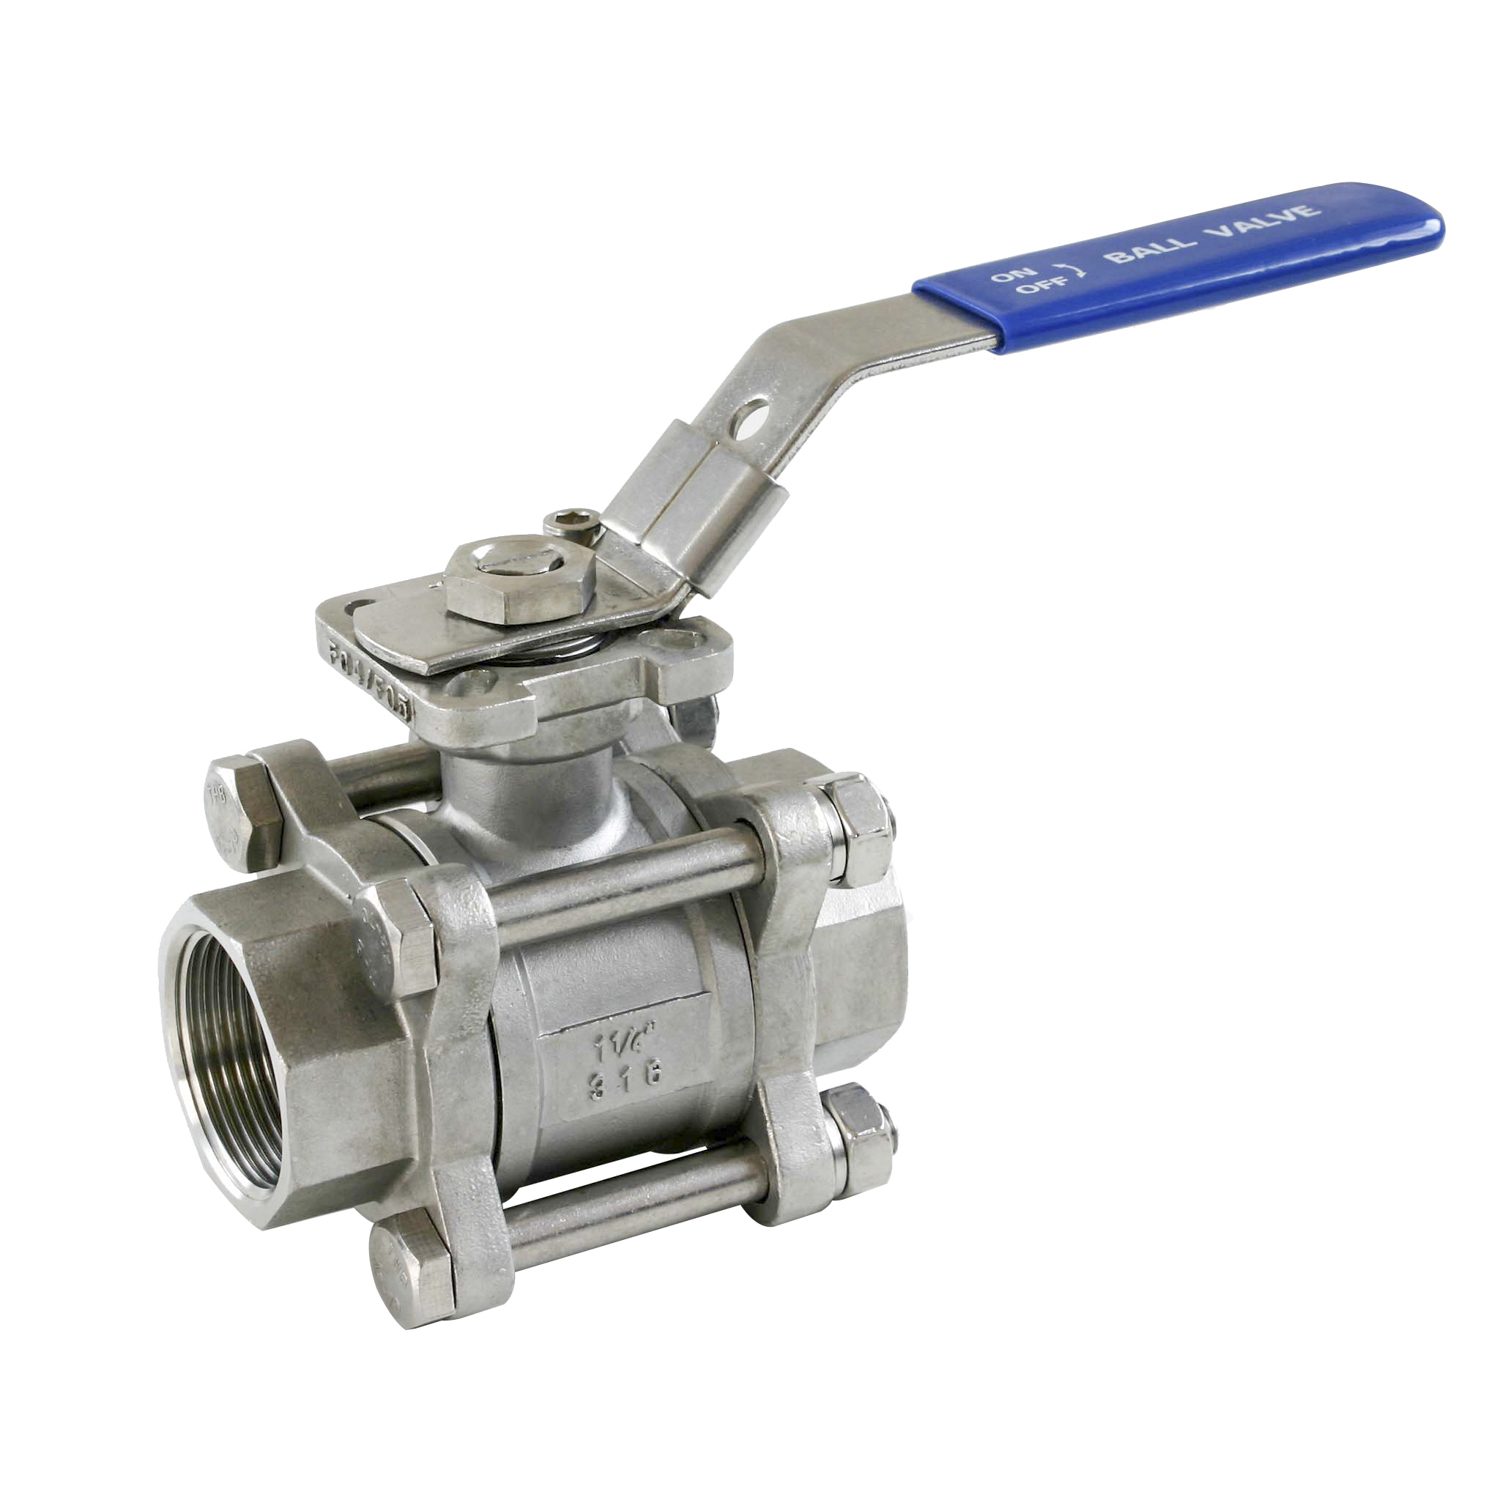 Inox Ball Valve Series 3PCS with ISO 5211 Pad From 1"